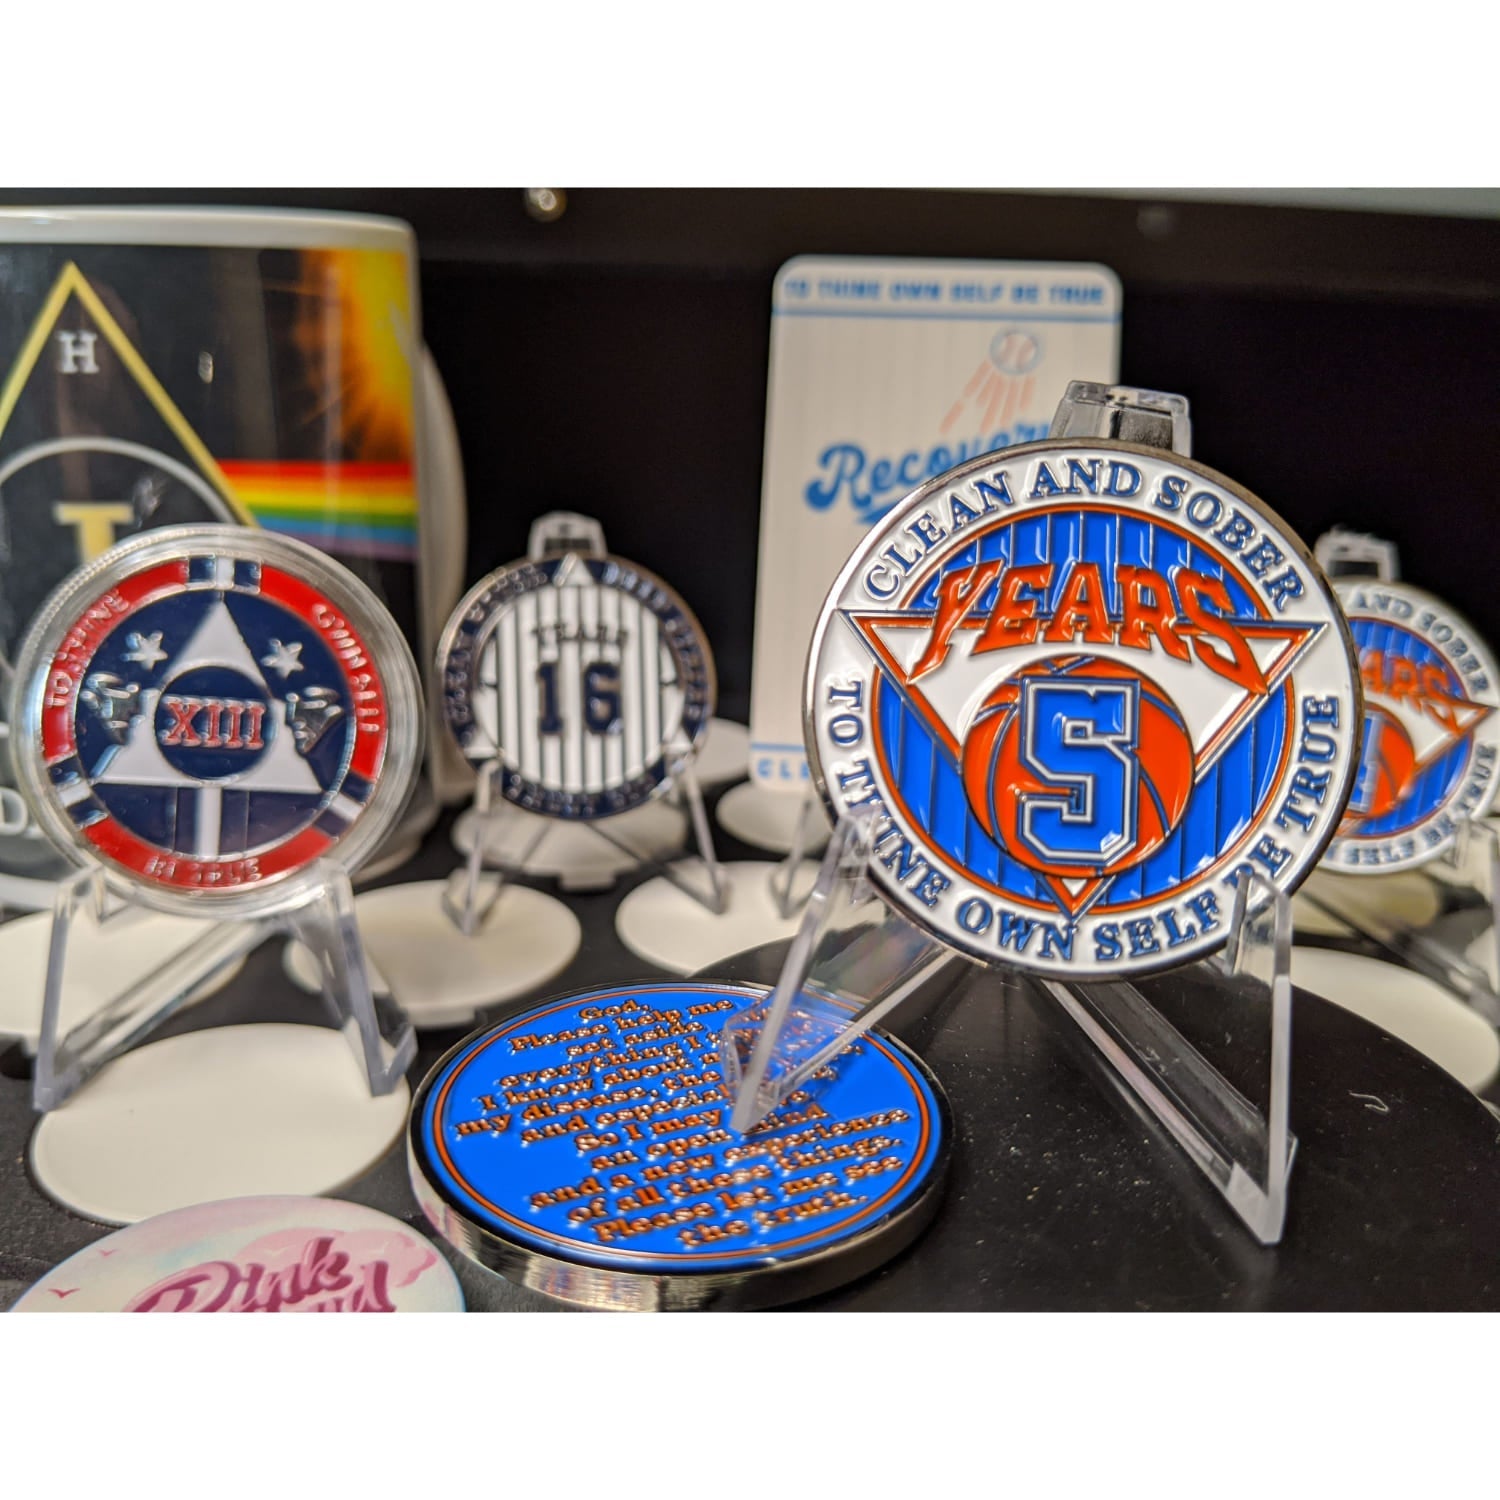 MyRecoveryStore Knicks Basketball Style Medallion AA Yearly Chip for Alcoholics Anonymous (Years 1-5) Comes Inside Its Own Blue Gift Box